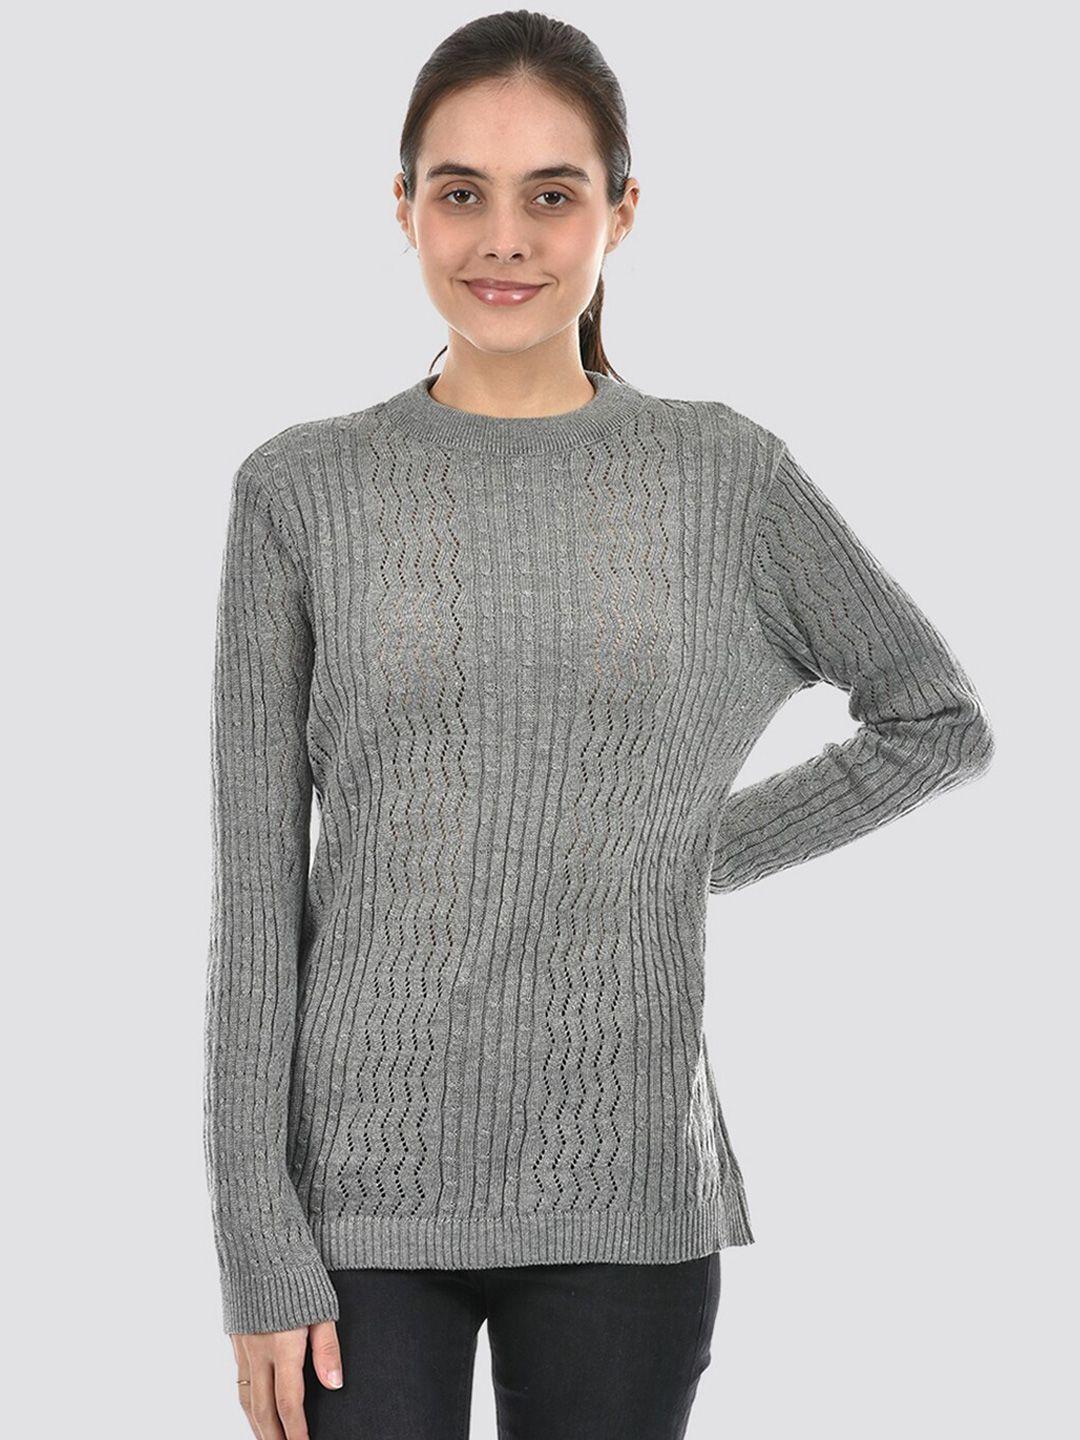 american-eye-cable-knit-self-design-acrylic-pullover-sweater